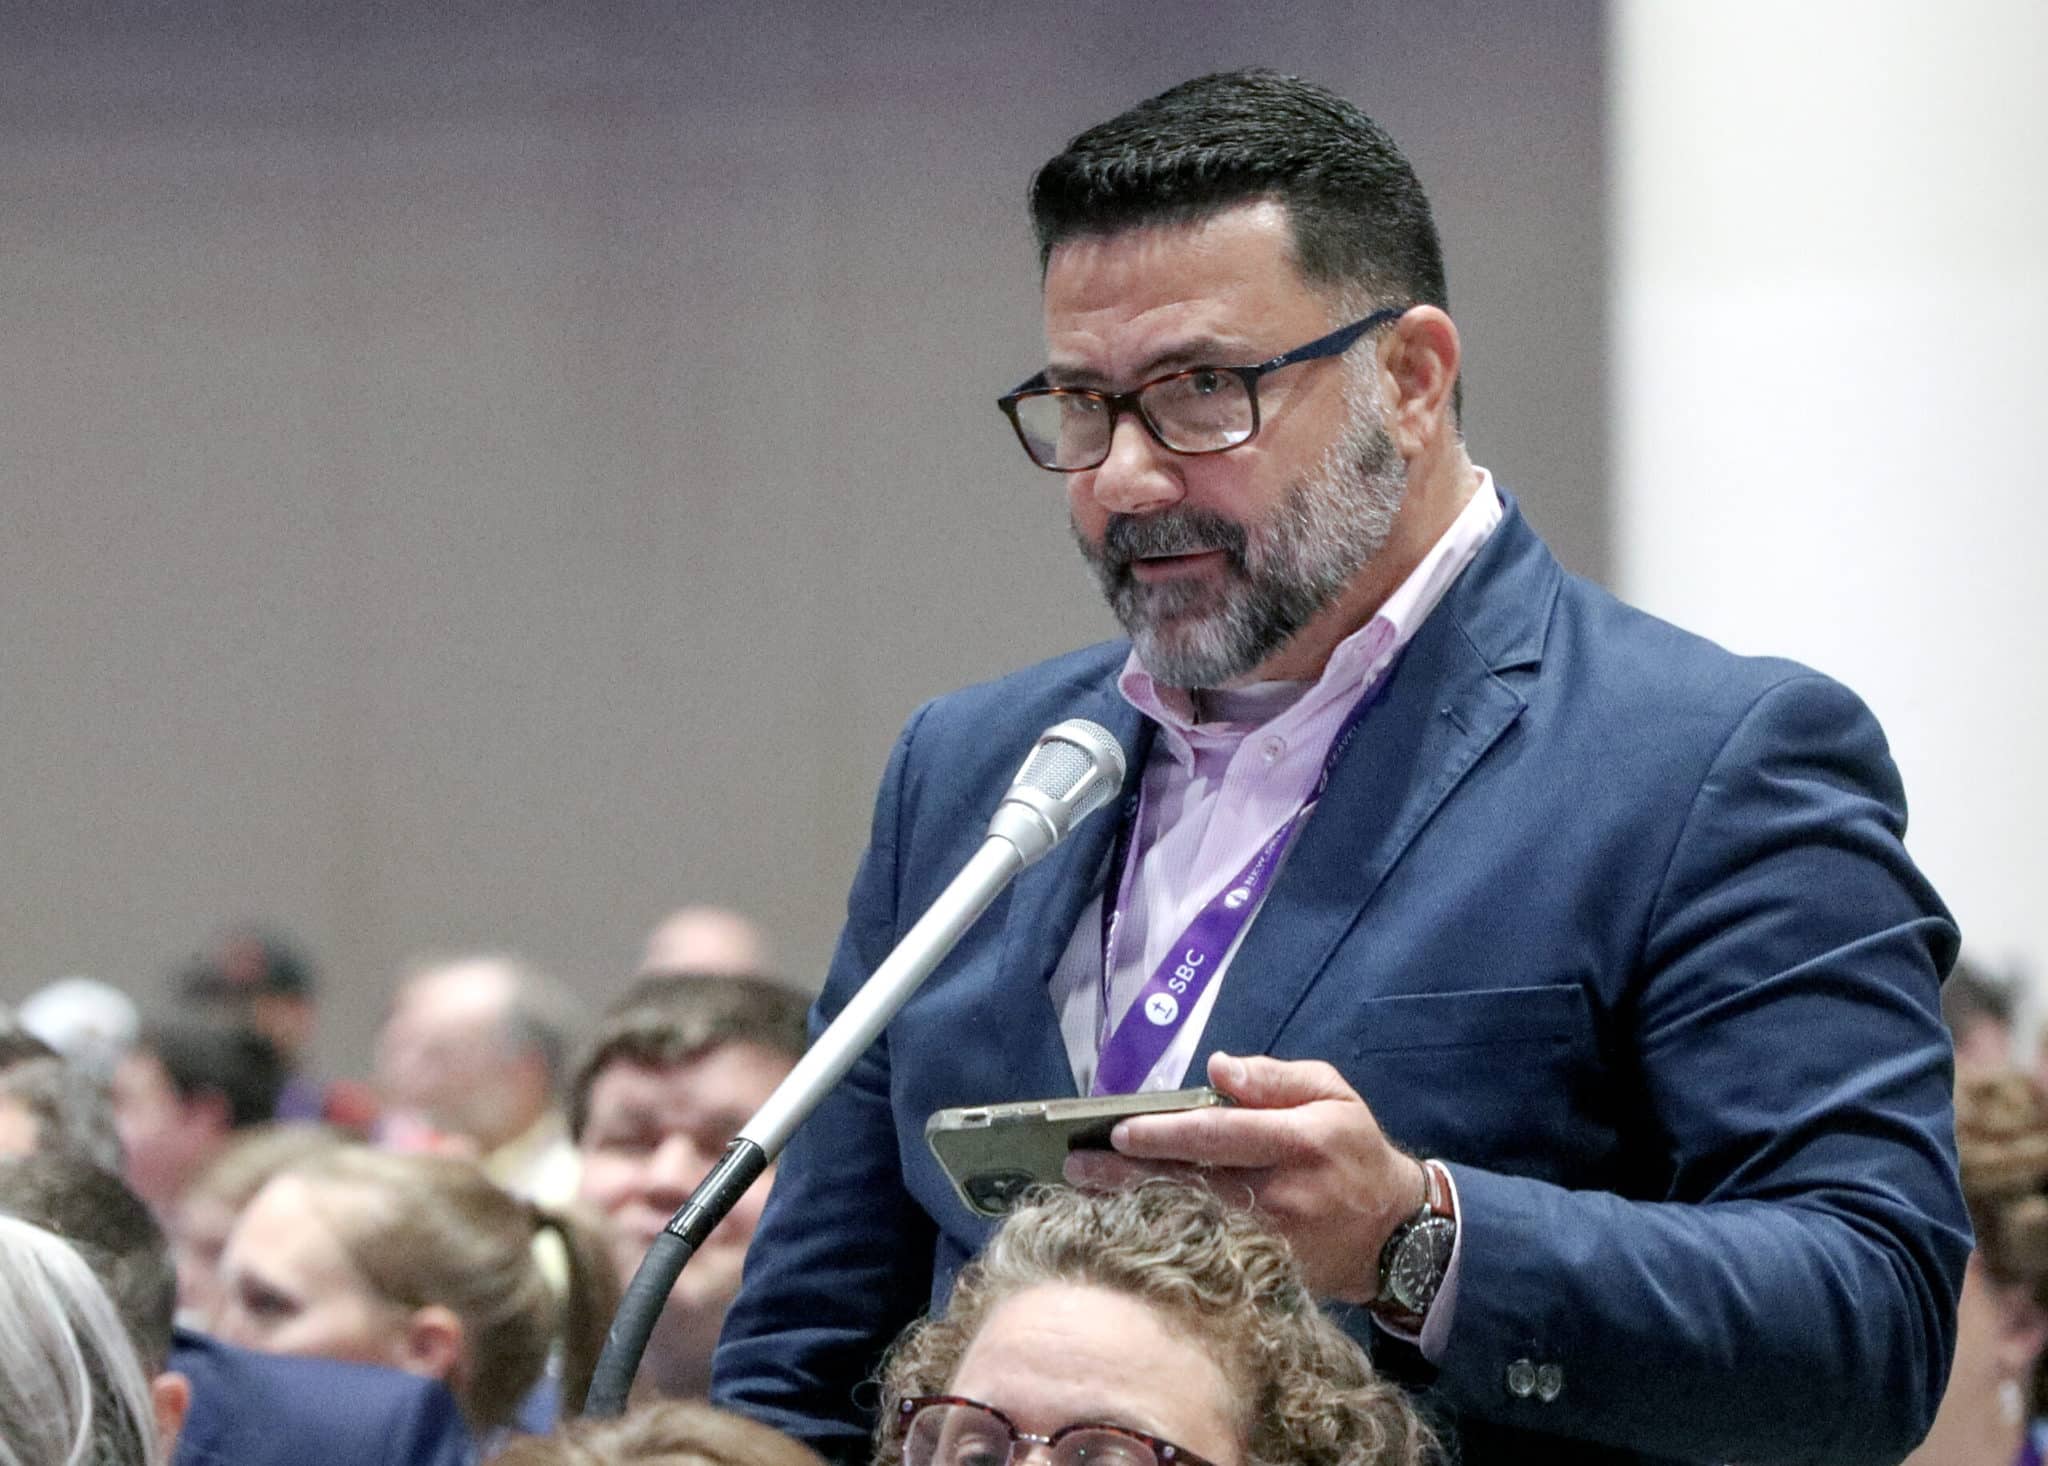 Texas pastor Juan Sanchez provided an amendment to Law's original motion. Both Sanchez' amendment and then Law's amended motion were adopted by messengers. The motion received the two-thirds vote required to be considered again next year. Another two-thirds vote will lead to a change in the SBC's constitution. Photo by Sonya Singh